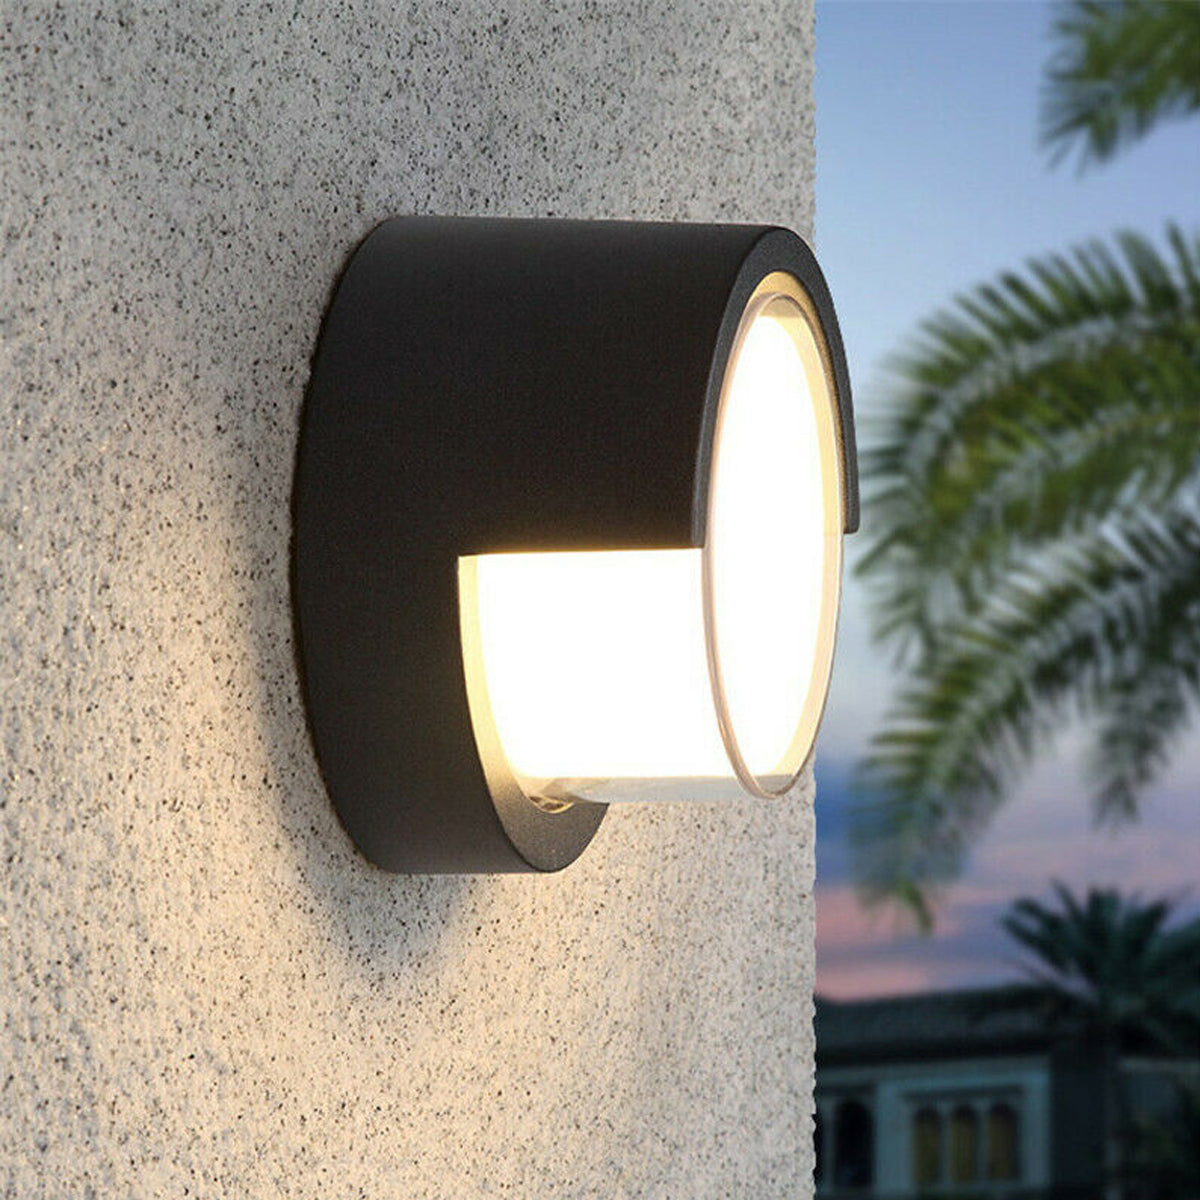 Sophia black and white round wall light is an modern simple fitting with a black polycarbonate body and opal diffuser. This stylish wall light is perfect for adding a pinch of modern flavour to doorways, sheds, patios, porch, driveways, garages, sheds, and more. This fitting is IP65 rated which makes it fully weatherproof light fitting.